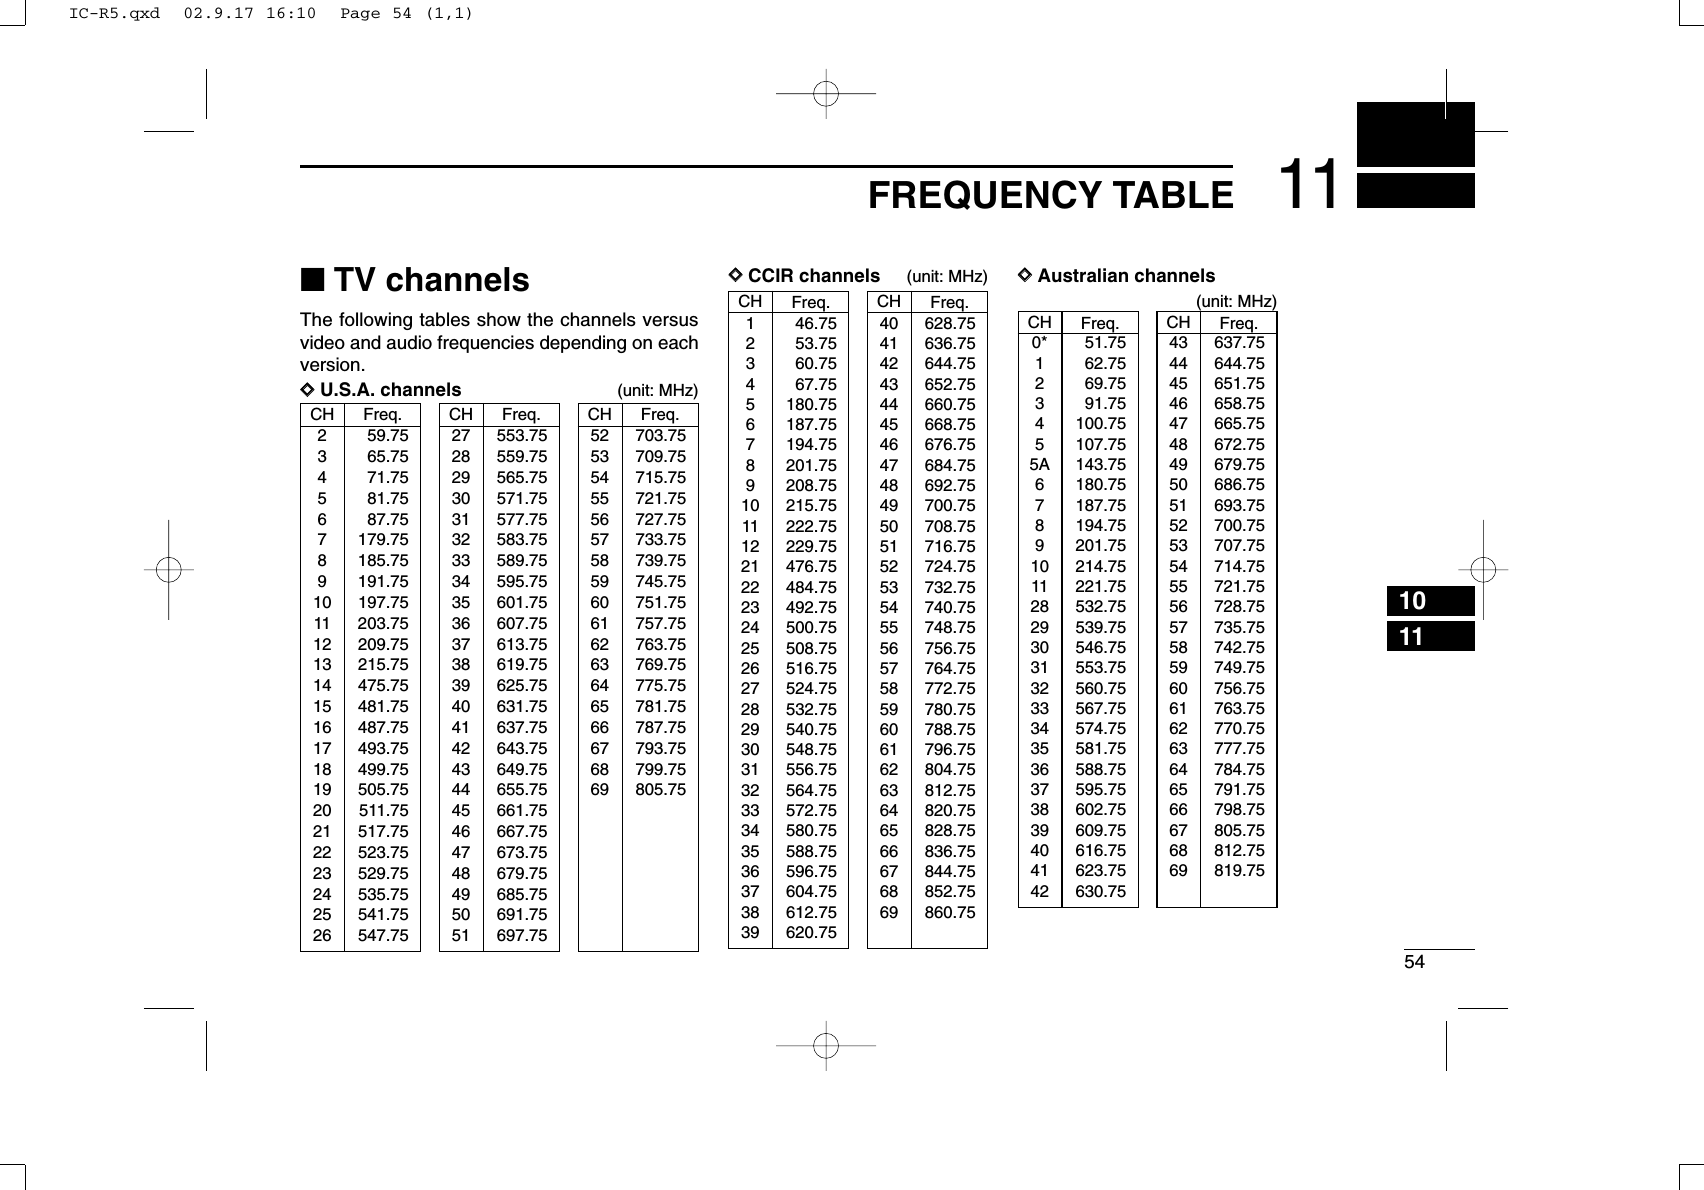 5411FREQUENCY TABLE1011CH Freq.40 628.7541 636.7542 644.7543 652.7544 660.7545 668.7546 676.7547 684.7548 692.7549 700.7550 708.7551 716.7552 724.7553 732.7554 740.7555 748.7556 756.7557 764.7558 772.7559 780.7560 788.7561 796.7562 804.7563 812.7564 820.7565 828.7566 836.7567 844.7568 852.7569 860.75CH Freq.1 46.752 53.753 60.754 67.755 180.756 187.757 194.758 201.759 208.7510 215.7511 222.7512 229.7521 476.7522 484.7523 492.7524 500.7525 508.7526 516.7527 524.7528 532.7529 540.7530 548.7531 556.7532 564.7533 572.7534 580.7535 588.7536 596.7537 604.7538 612.7539 620.75■TV channelsThe following tables show the channels versusvideo and audio frequencies depending on eachversion.DDU.S.A. channels (unit: MHz)CH Freq.2 59.753 65.754 71.755 81.756 87.757 179.758 185.759 191.7510 197.7511 203.7512 209.7513 215.7514 475.7515 481.7516 487.7517 493.7518 499.7519 505.7520 511.7521 517.7522 523.7523 529.7524 535.7525 541.7526 547.75CH Freq.27 553.7528 559.7529 565.7530 571.7531 577.7532 583.7533 589.7534 595.7535 601.7536 607.7537 613.7538 619.7539 625.7540 631.7541 637.7542 643.7543 649.7544 655.7545 661.7546 667.7547 673.7548 679.7549 685.7550 691.7551 697.75CH Freq.52 703.7553 709.7554 715.7555 721.7556 727.7557 733.7558 739.7559 745.7560 751.7561 757.7562 763.7563 769.7564 775.7565 781.7566 787.7567 793.7568 799.7569 805.75DDCCIR channels (unit: MHz) DDAustralian channels(unit: MHz)CH Freq.43 637.7544 644.7545 651.7546 658.7547 665.7548 672.7549 679.7550 686.7551 693.7552 700.7553 707.7554 714.7555 721.7556 728.7557 735.7558 742.7559 749.7560 756.7561 763.7562 770.7563 777.7564 784.7565 791.7566 798.7567 805.7568 812.7569 819.75CH Freq.0* 51.751 62.752 69.753 91.754 100.755 107.755A 143.756 180.757 187.758 194.759 201.7510 214.7511 221.7528 532.7529 539.7530 546.7531 553.7532 560.7533 567.7534 574.7535 581.7536 588.7537 595.7538 602.7539 609.7540 616.7541 623.7542 630.75IC-R5.qxd  02.9.17 16:10  Page 54 (1,1)